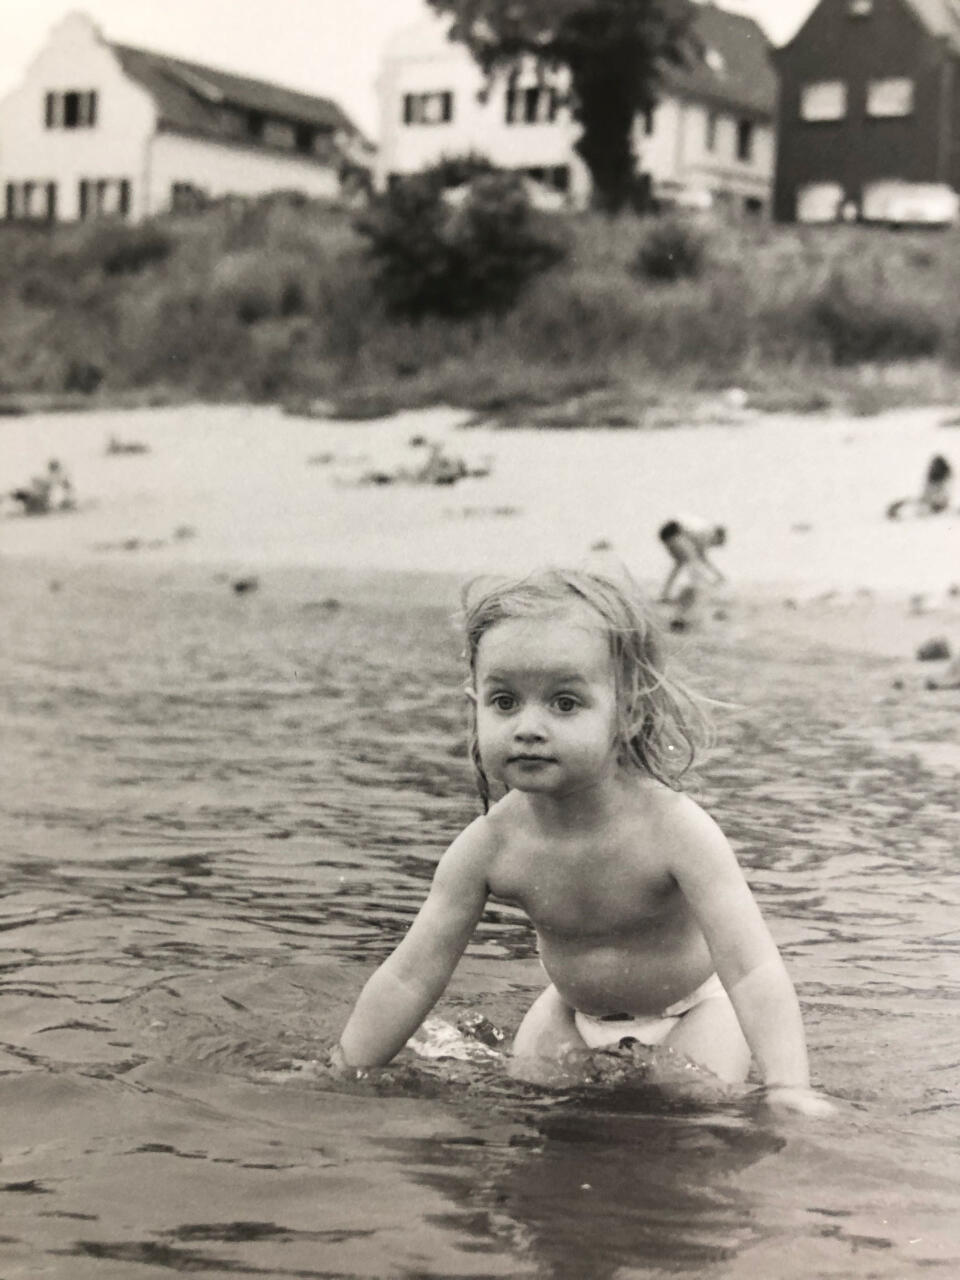 A crop of the child in the water.